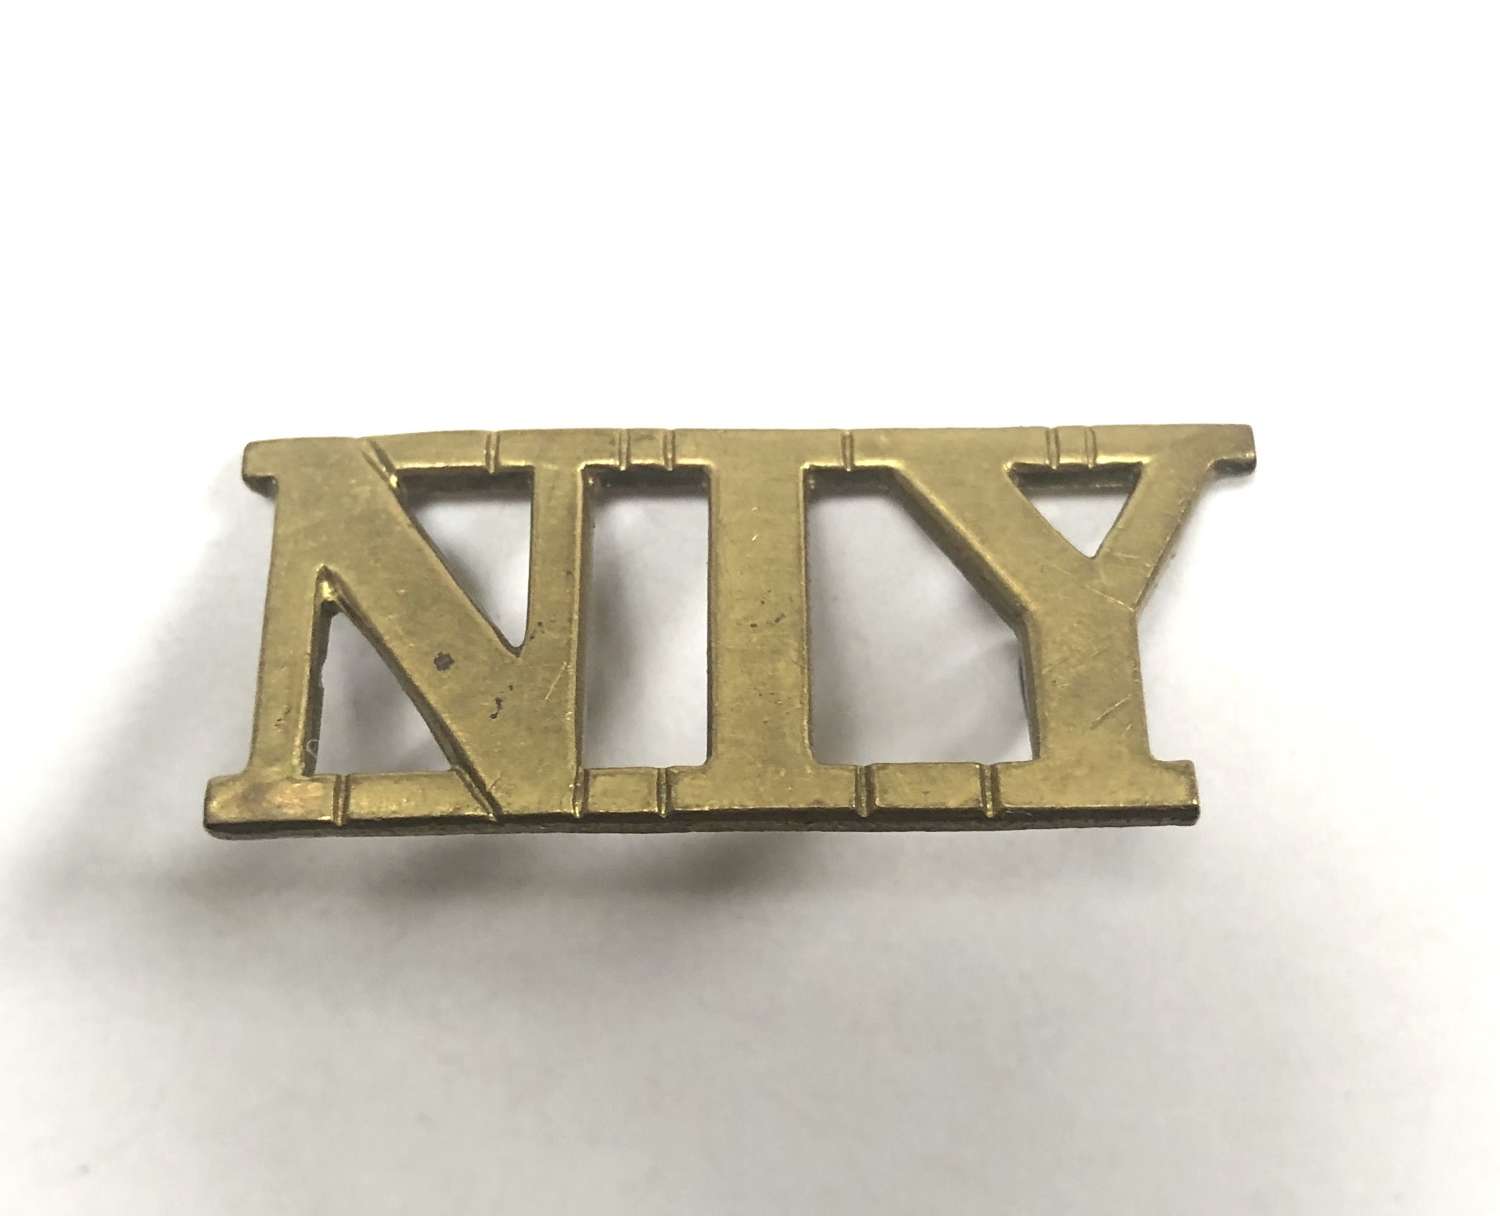 NIY Northamptonshire Imperial Yeomanry shoulder title c1902-08